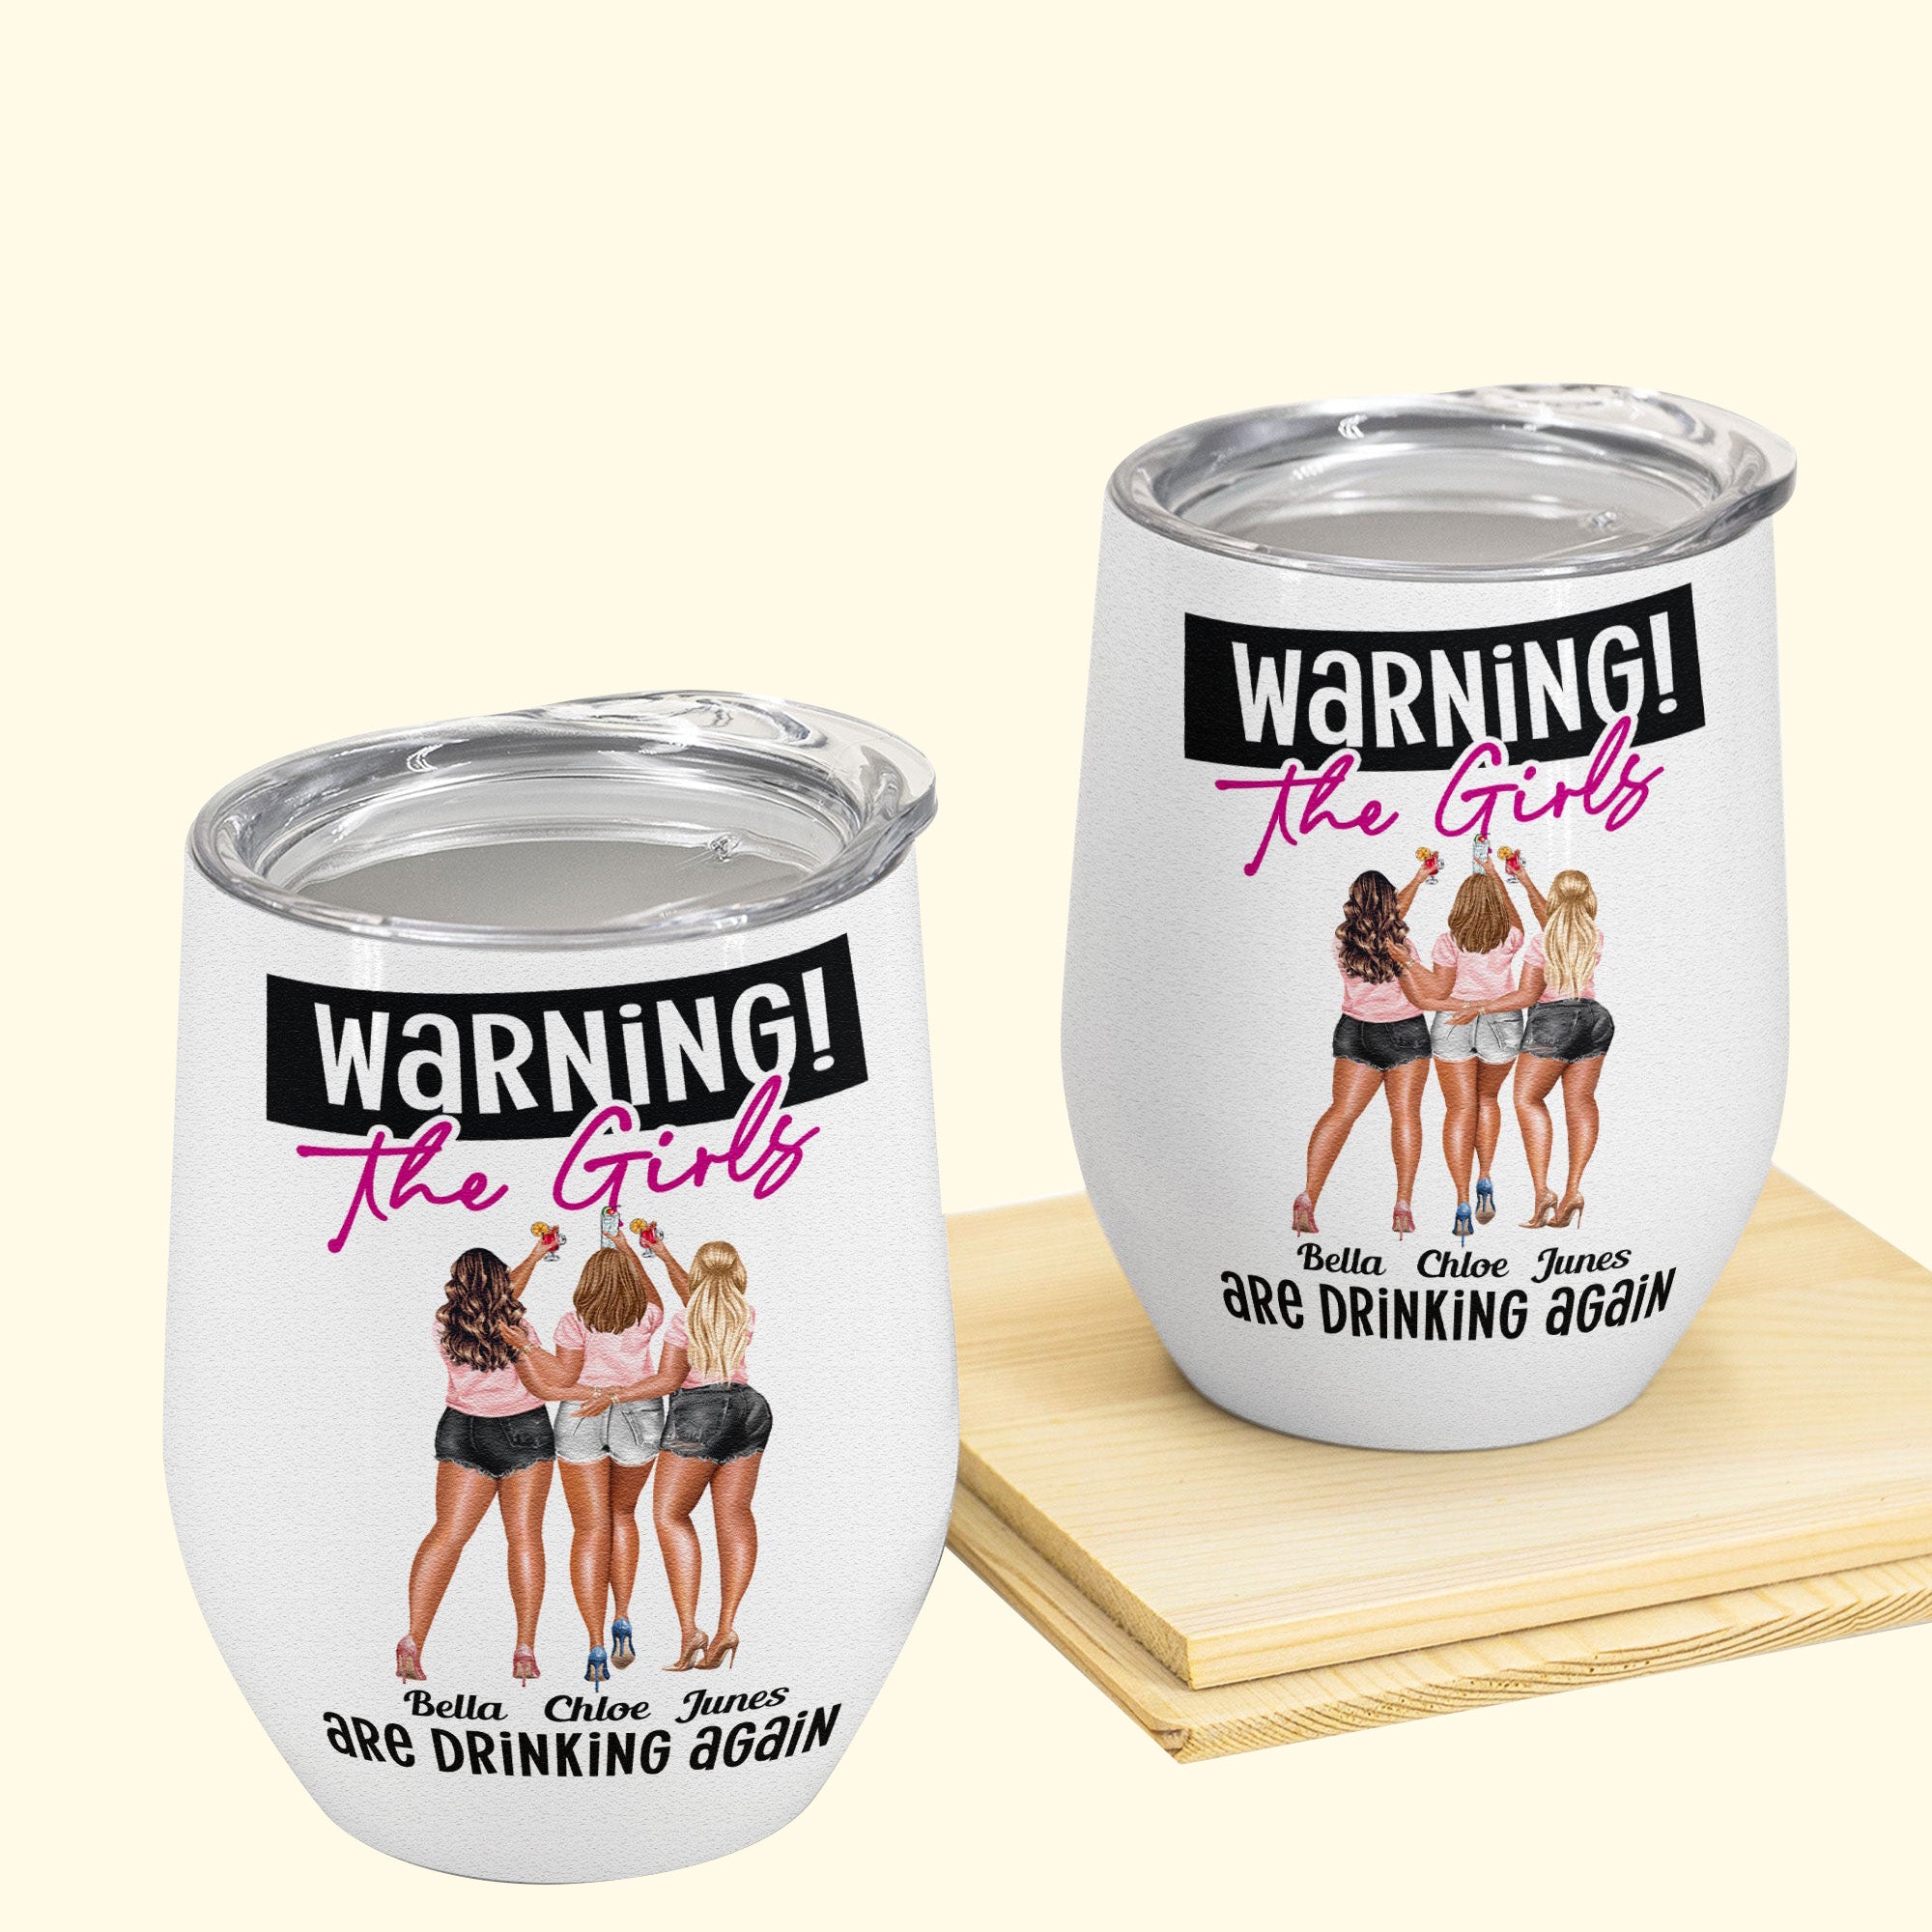 The Girls Are Drinking Again - Personalized Wine Tumbler